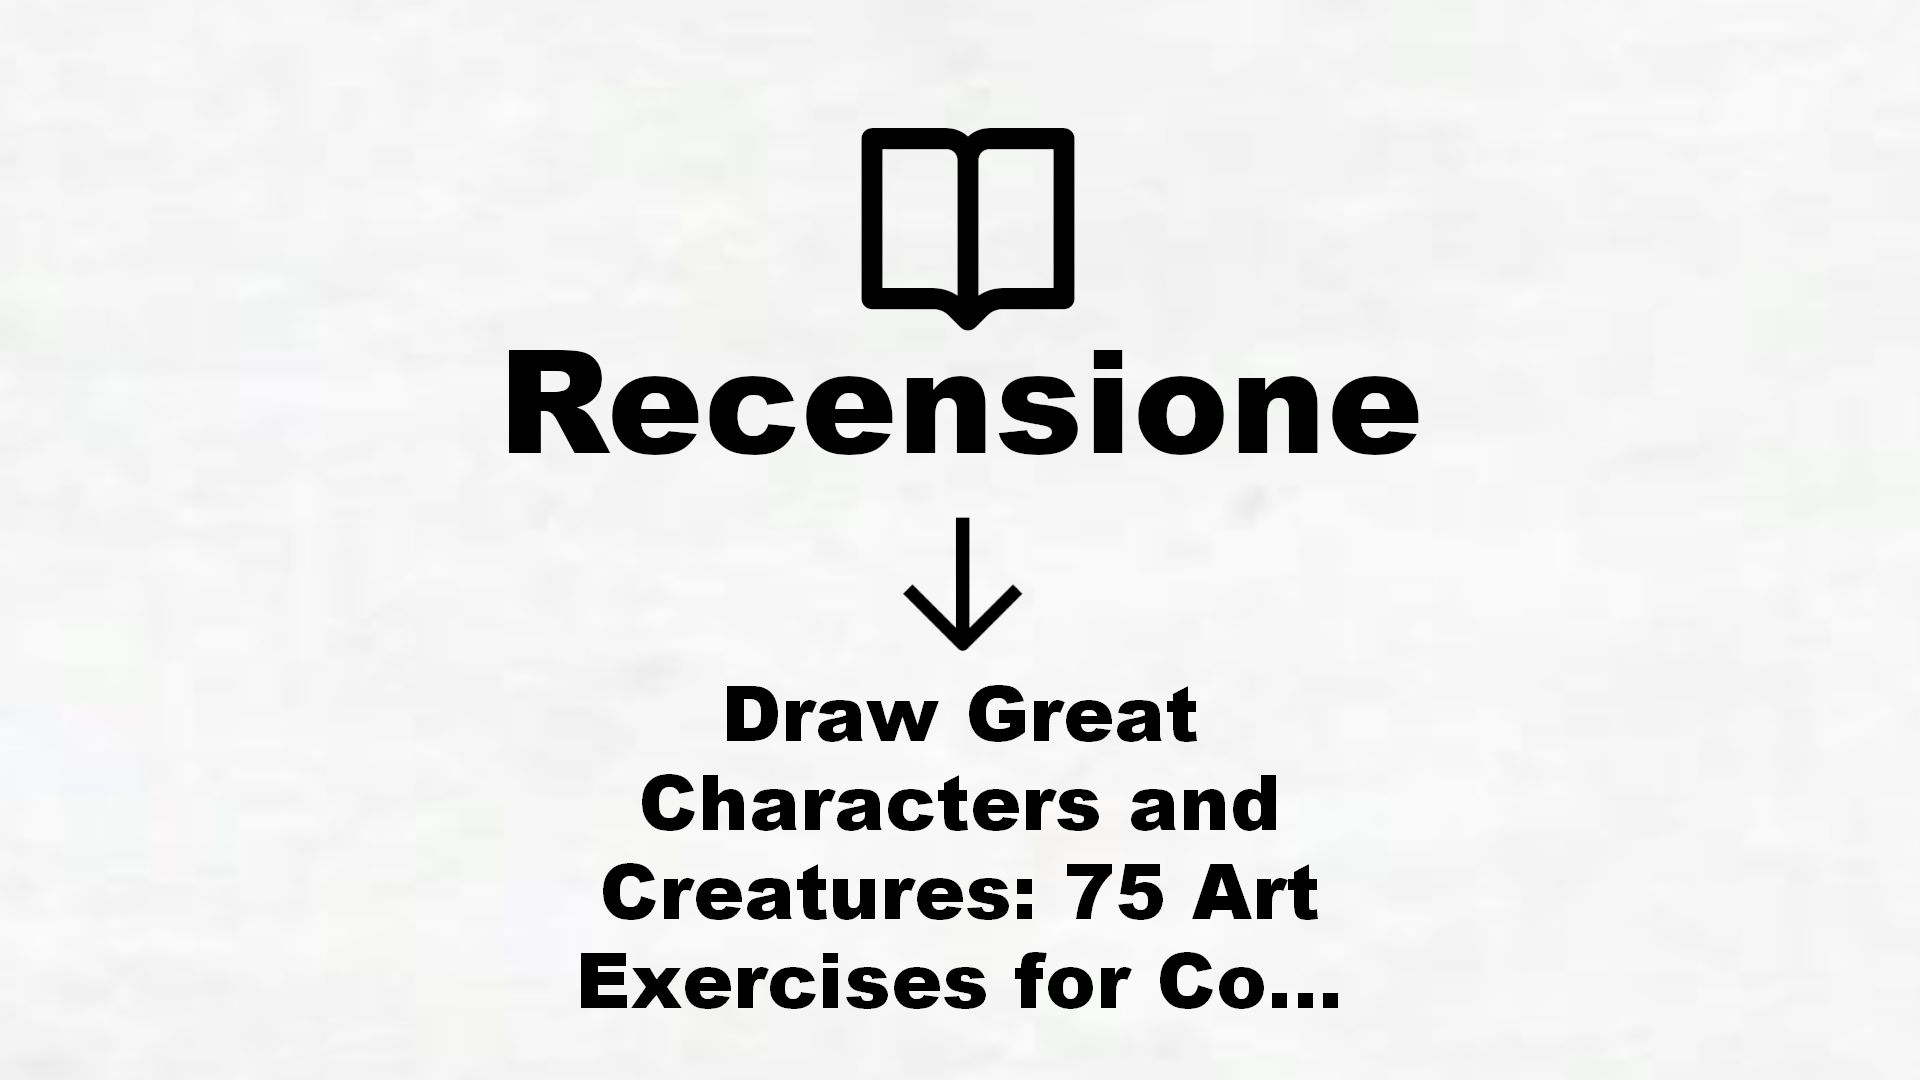 Draw Great Characters and Creatures: 75 Art Exercises for Comics and Animation – Recensione Libro